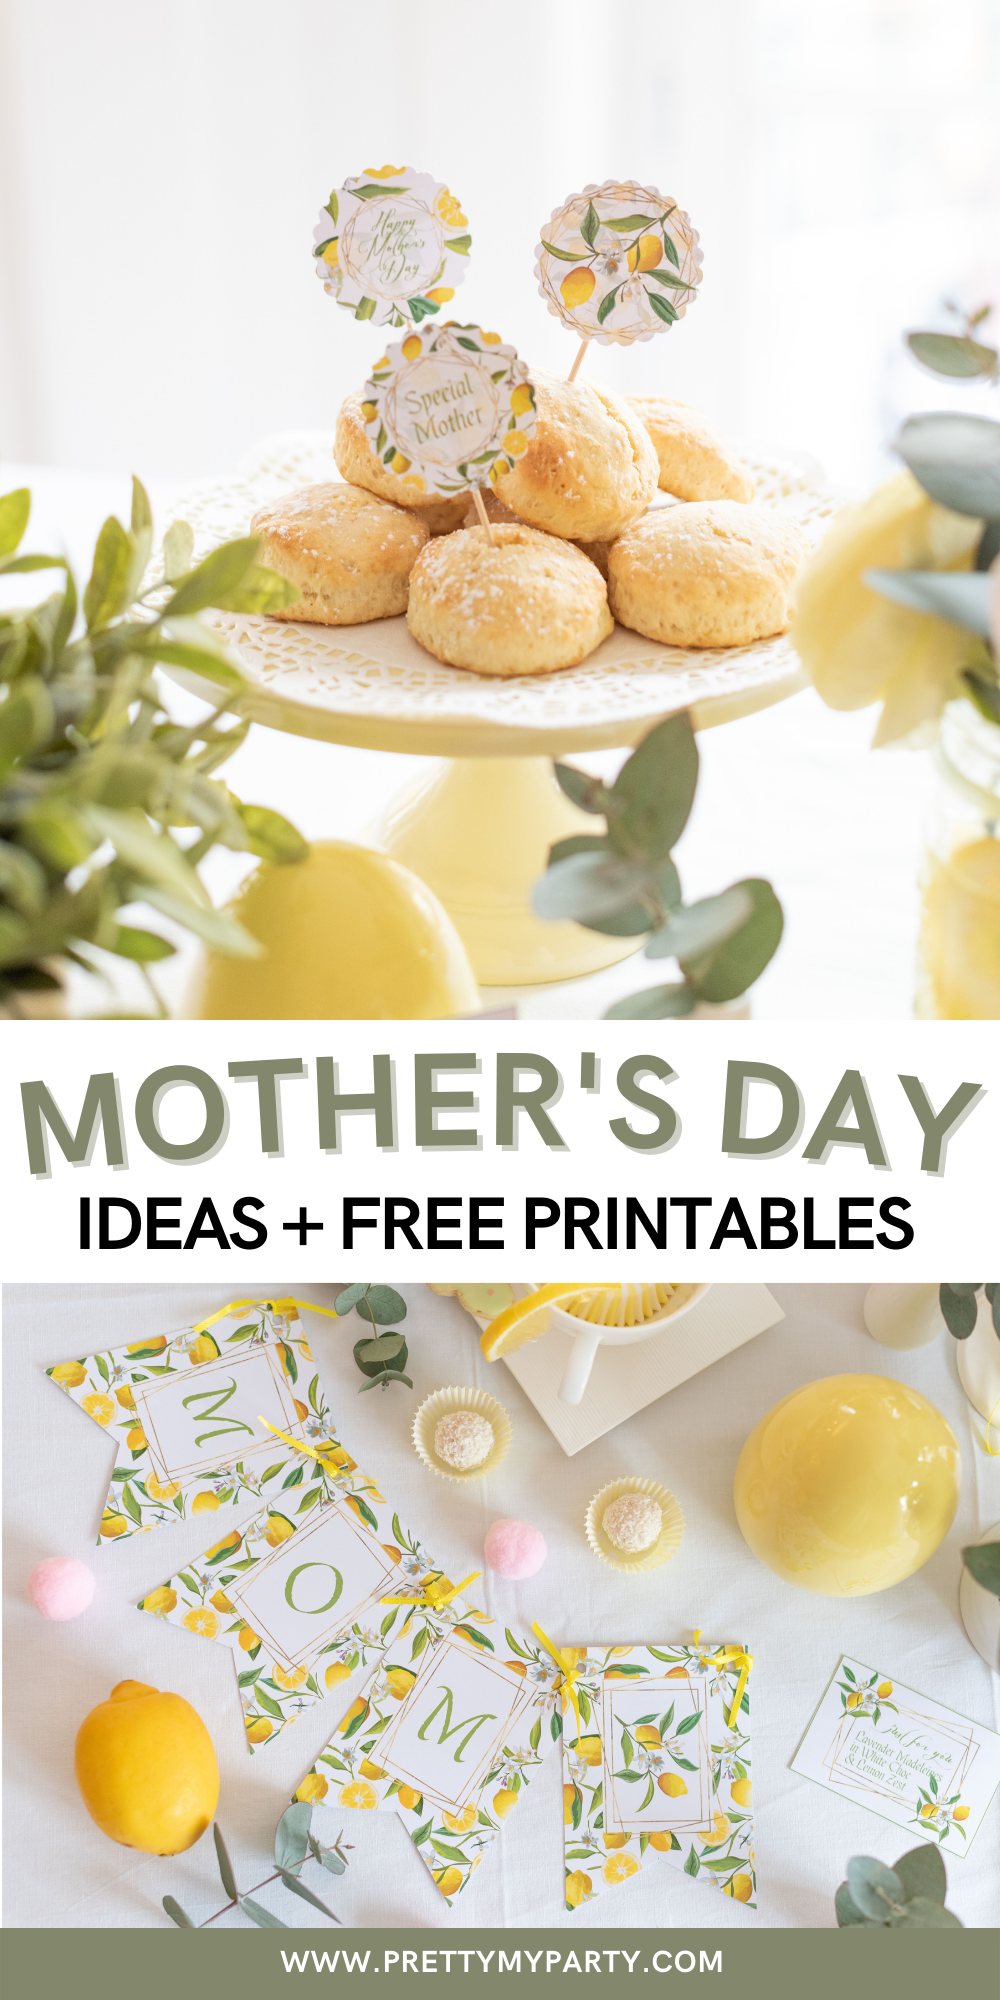 Free Mother's Day Printables on Pretty My Party